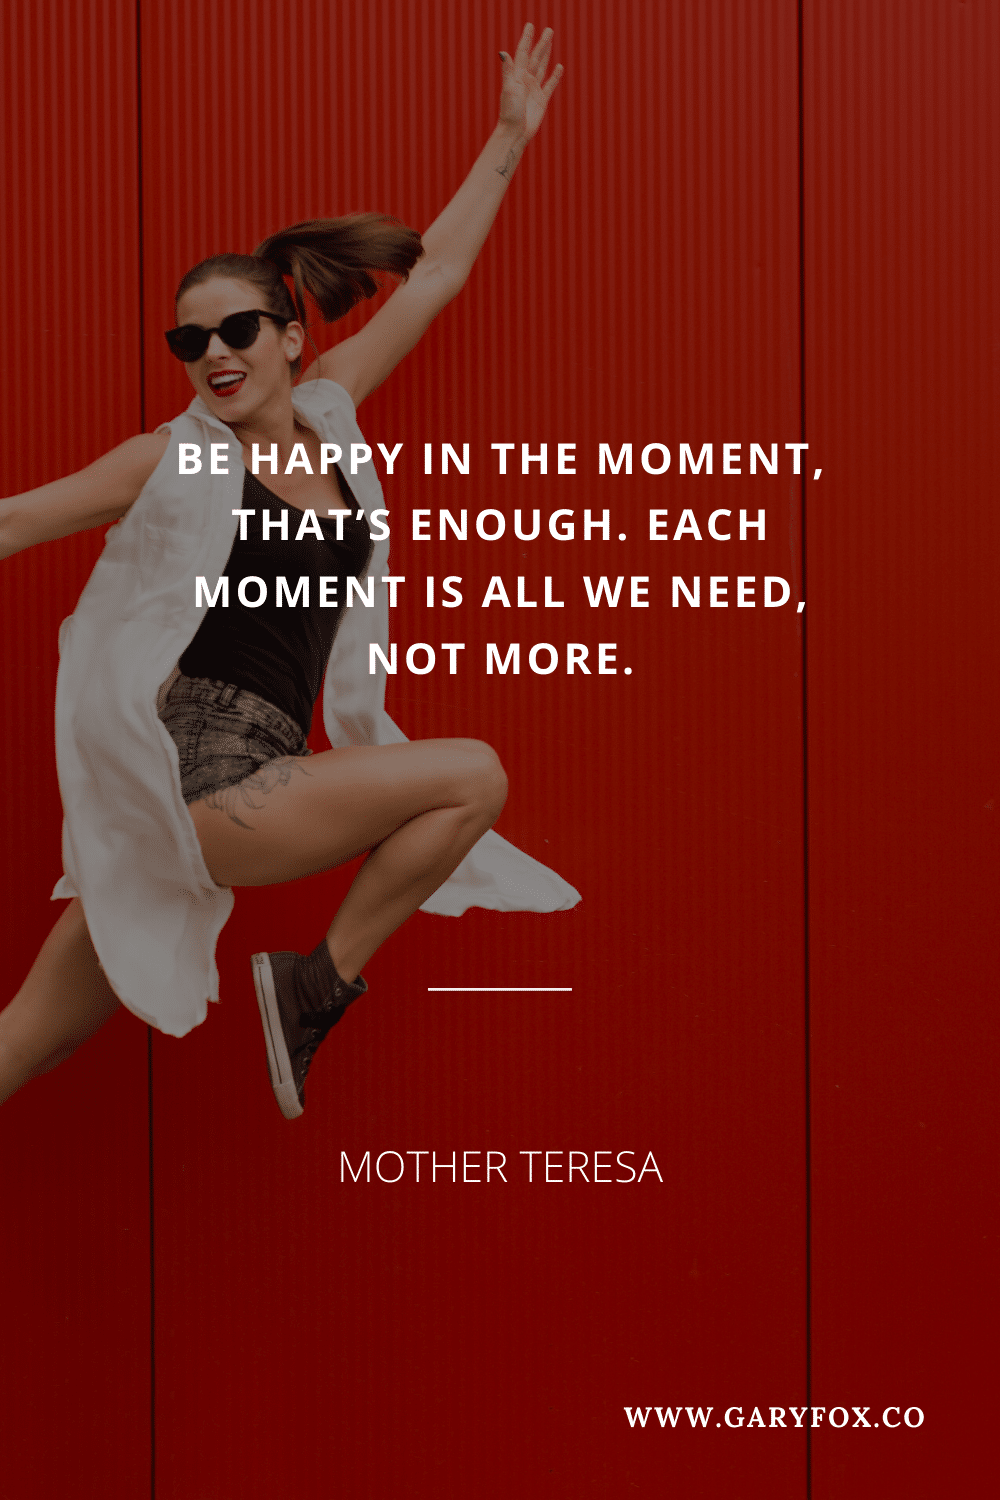 Be Happy In The Moment, That’s Enough. Each Moment Is All We Need, Not More.